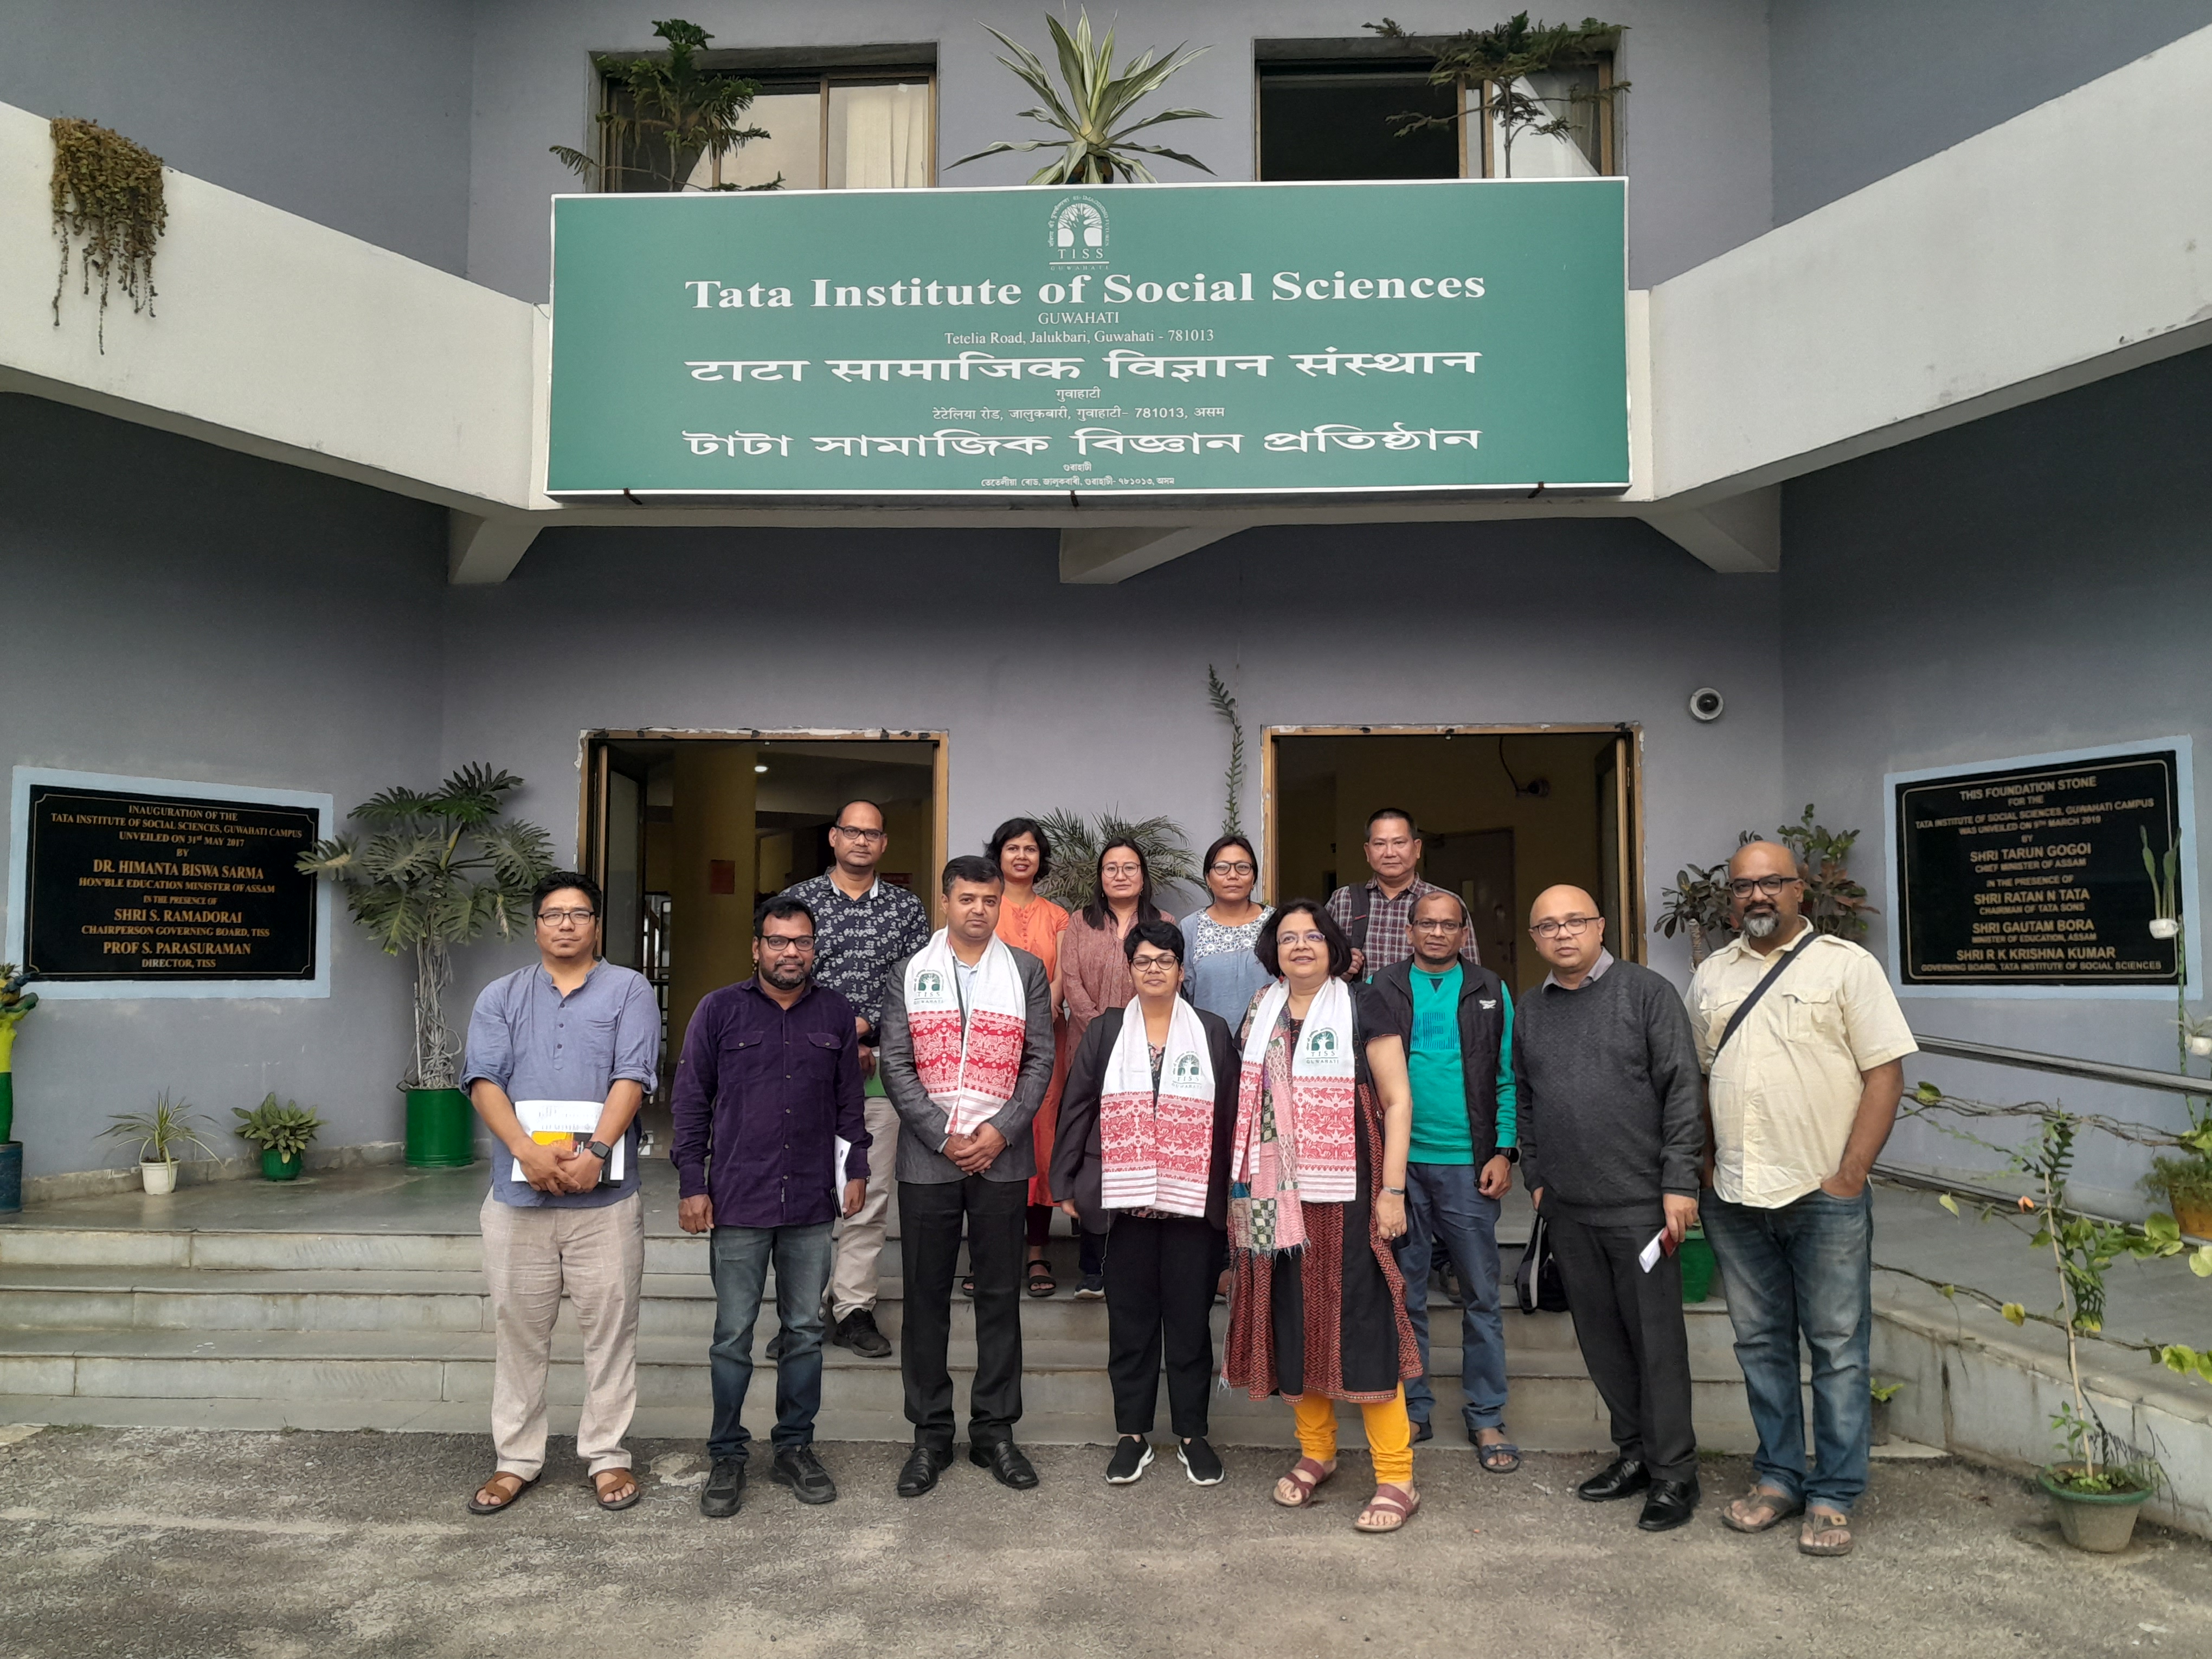 Institutional visit and Interaction with faculty at the Tata Institute of Social Sciences, Guwahati